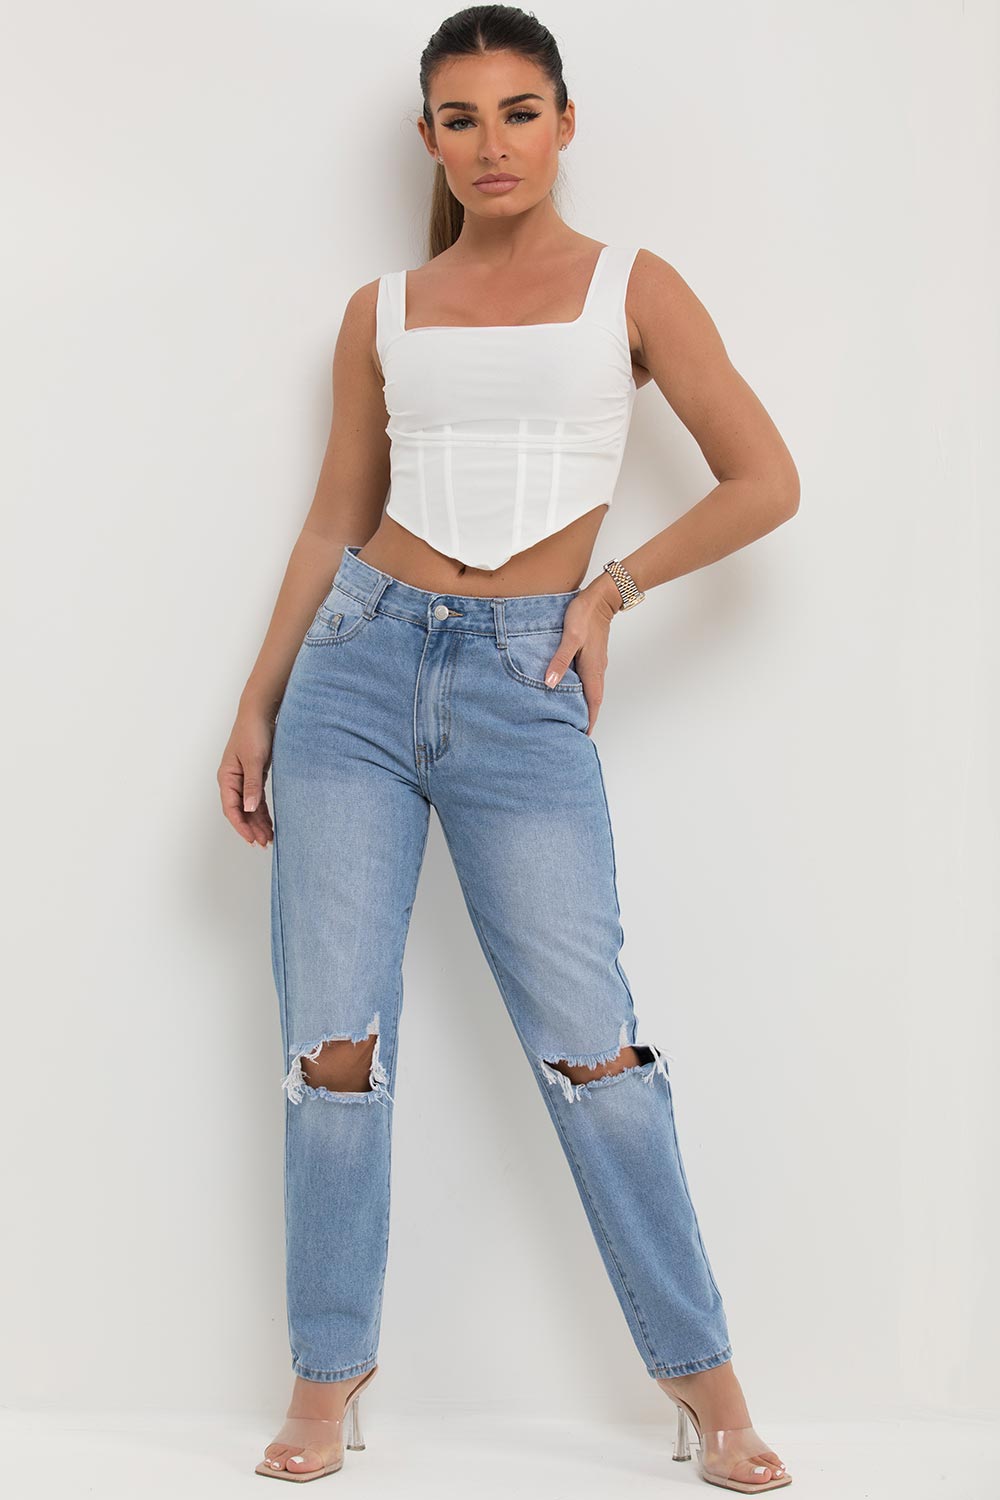 ripped high waisted jeans womens